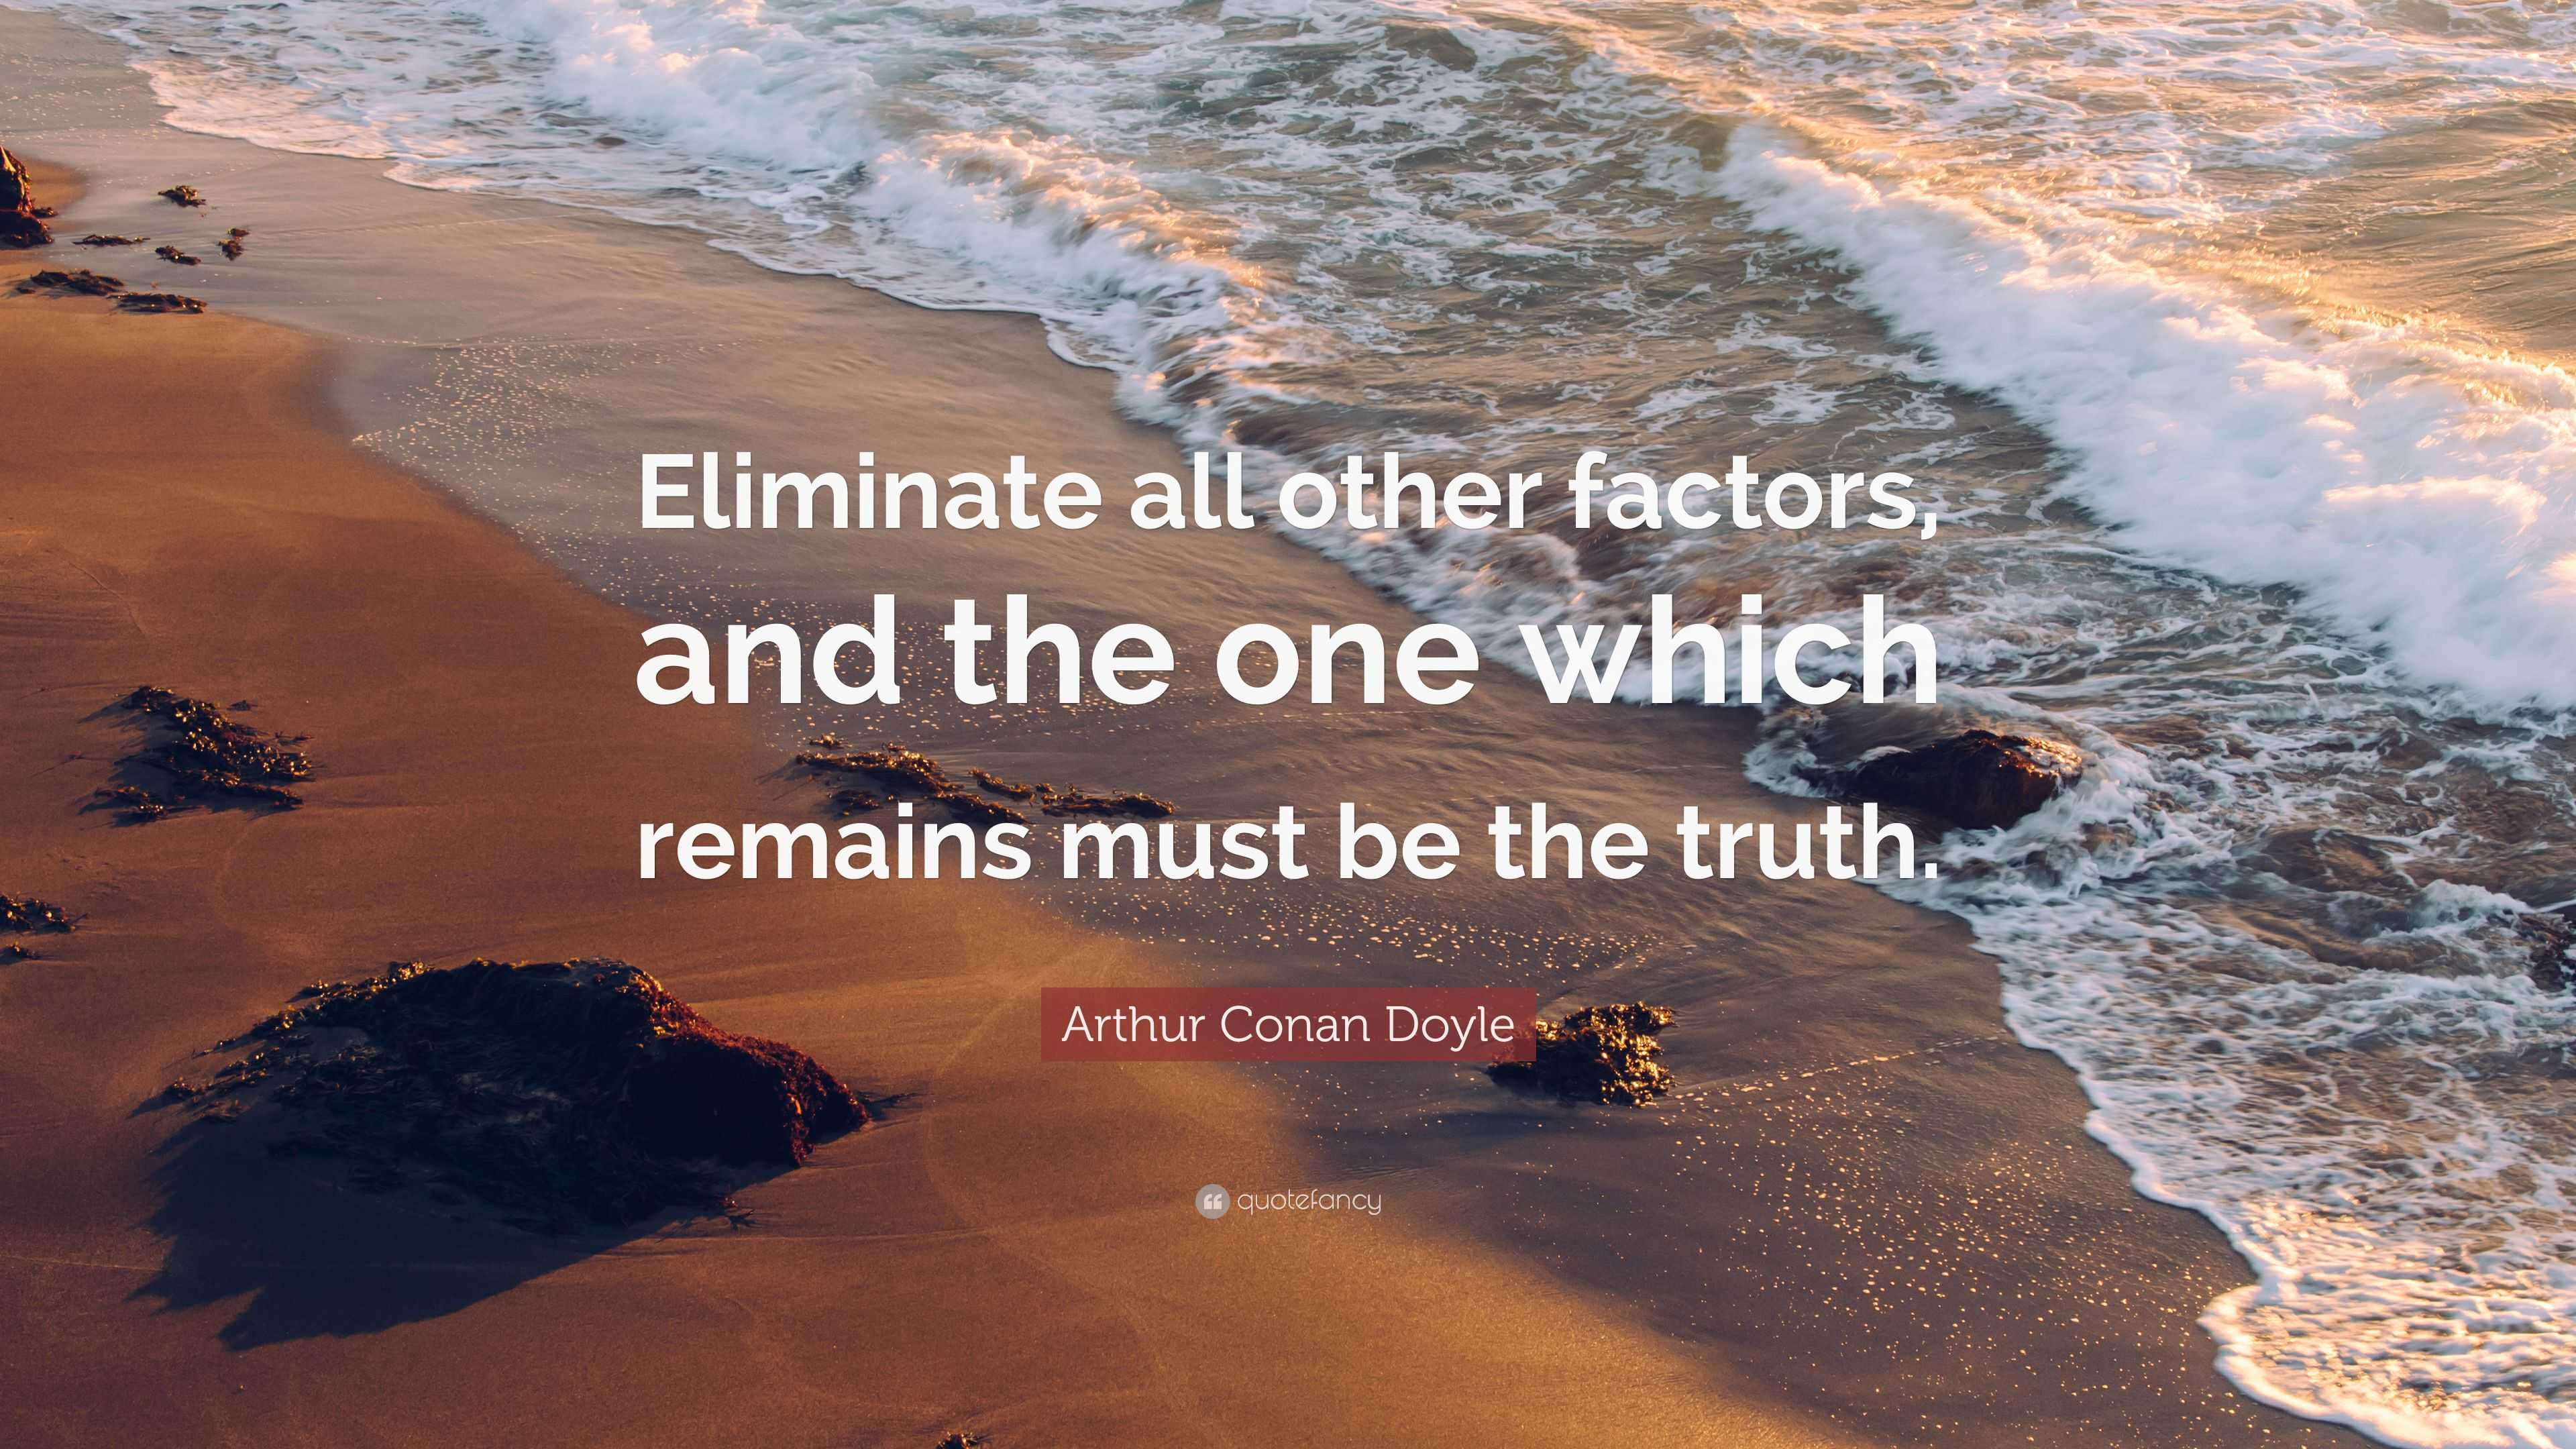 Arthur Conan Doyle Quote: “Eliminate all other factors, and the one ...